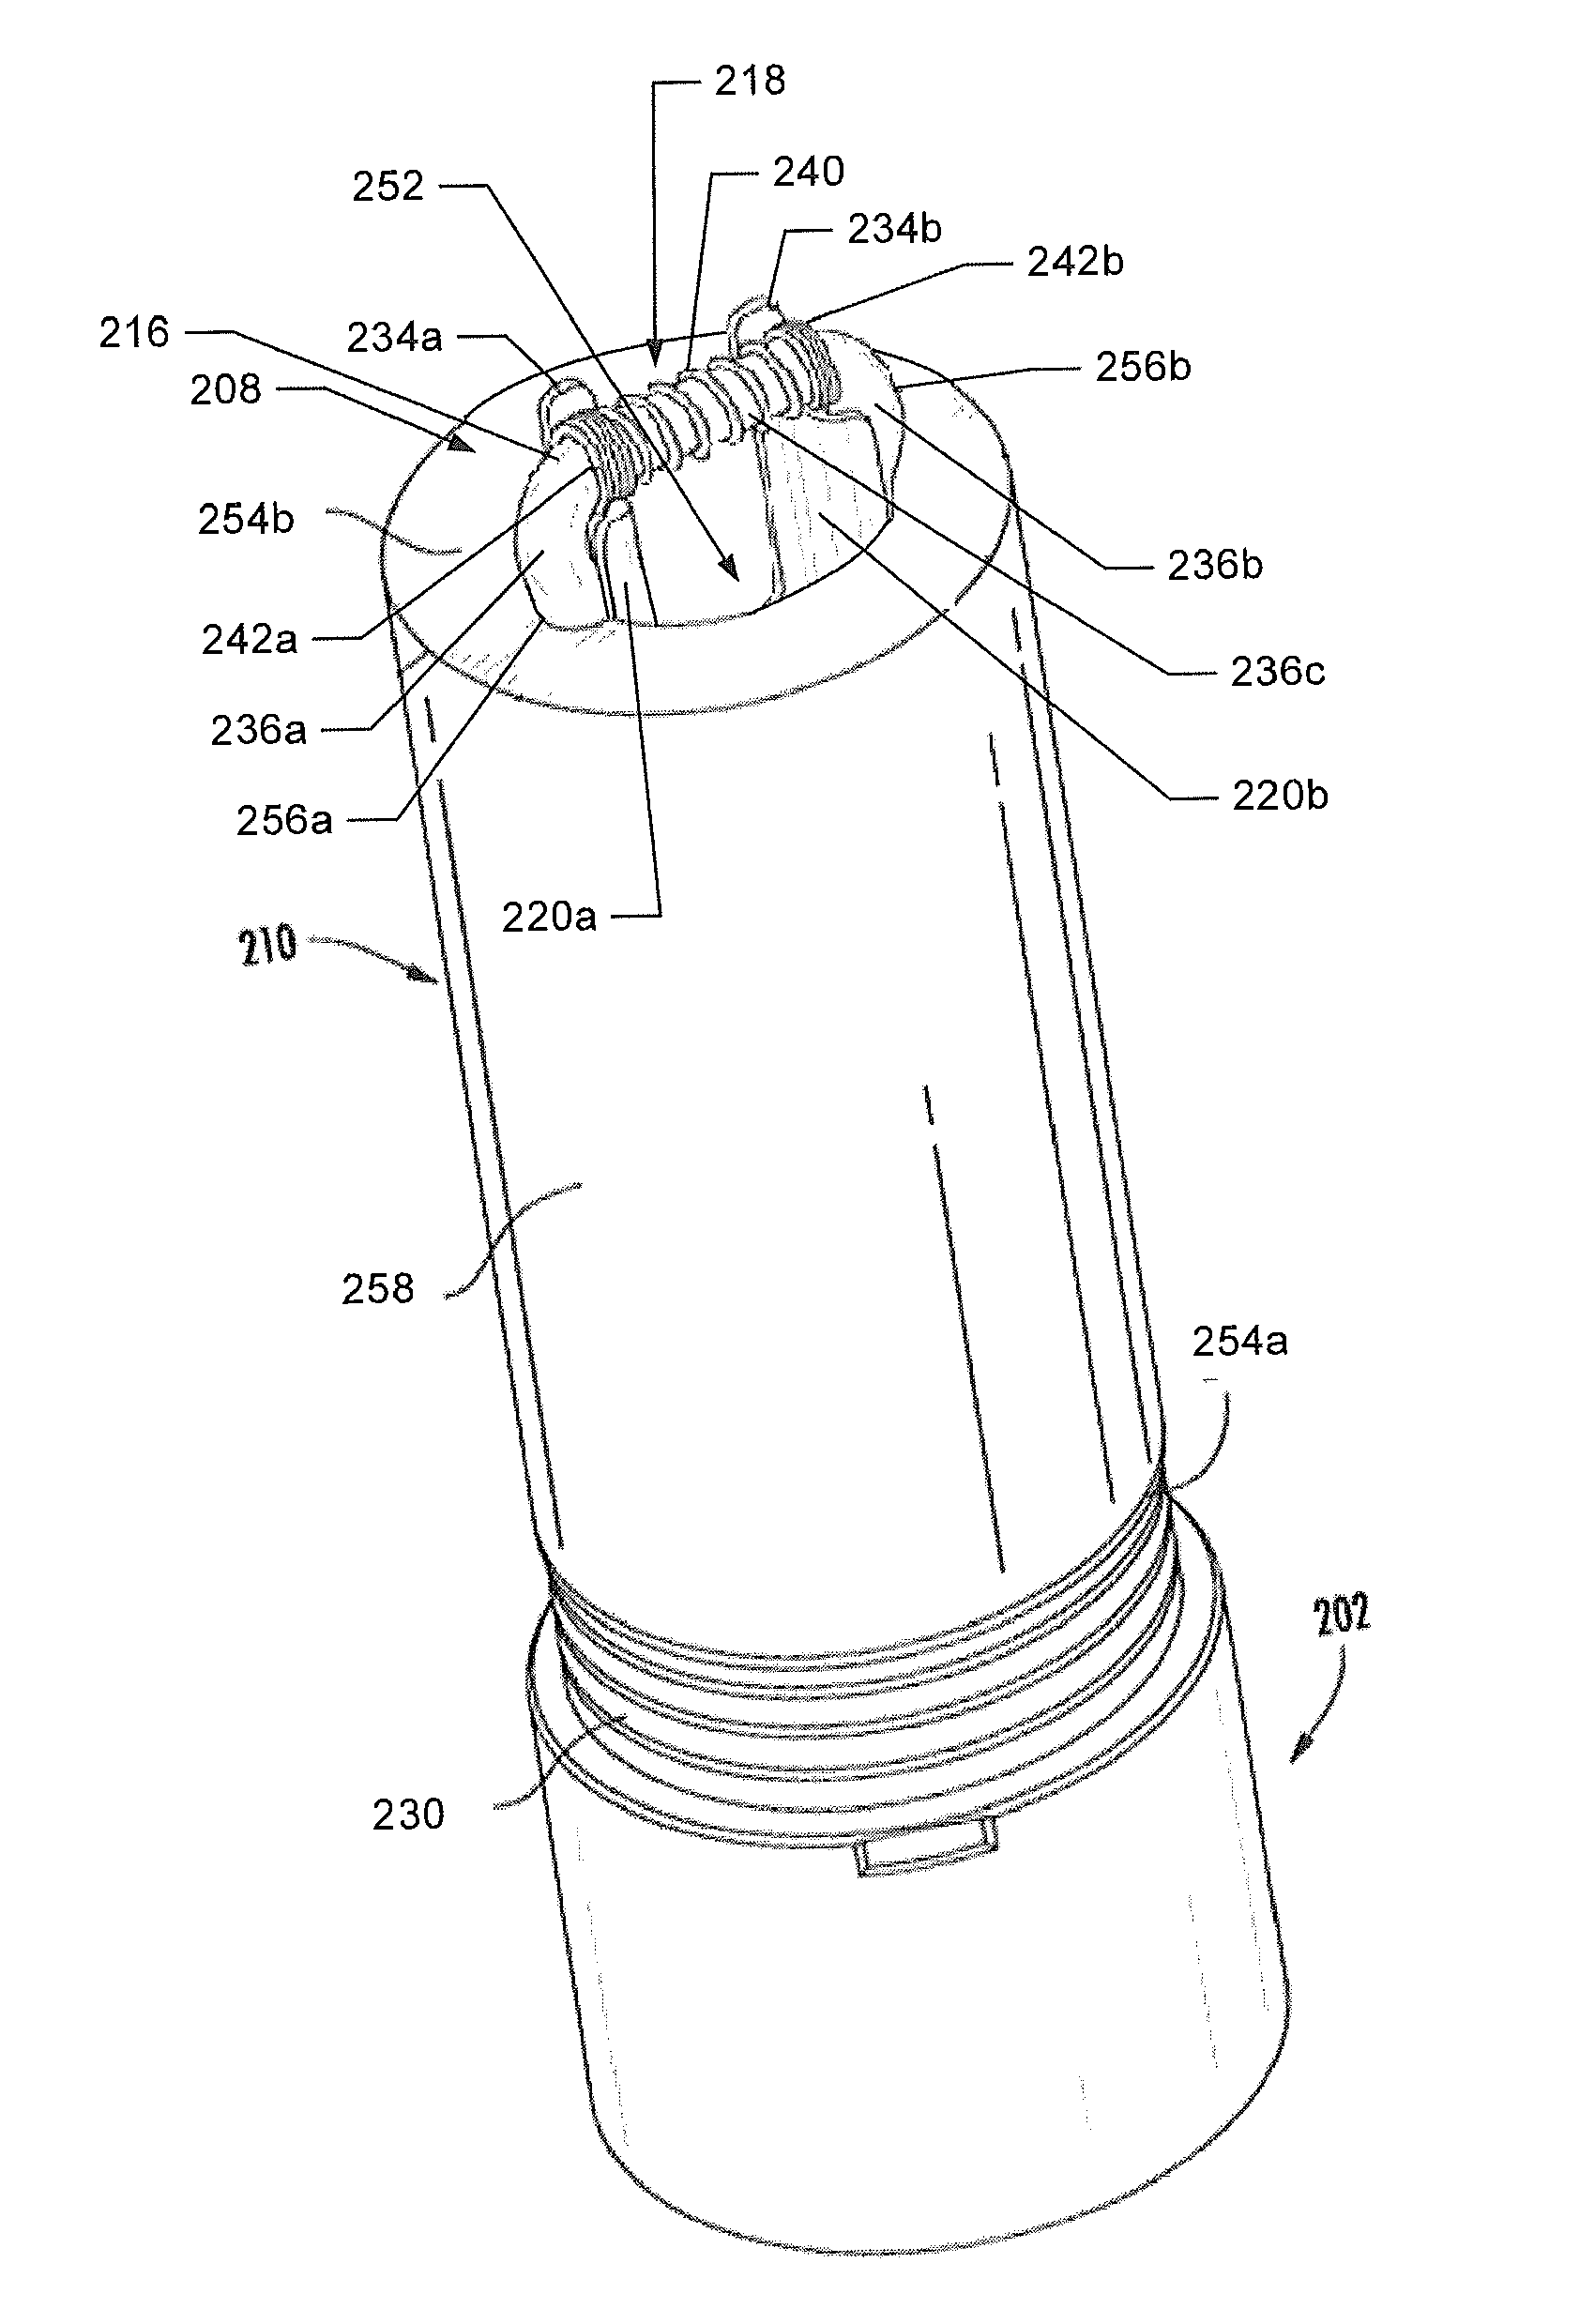 Atomizer for an aerosol delivery device and related input, aerosol production assembly, cartridge, and method